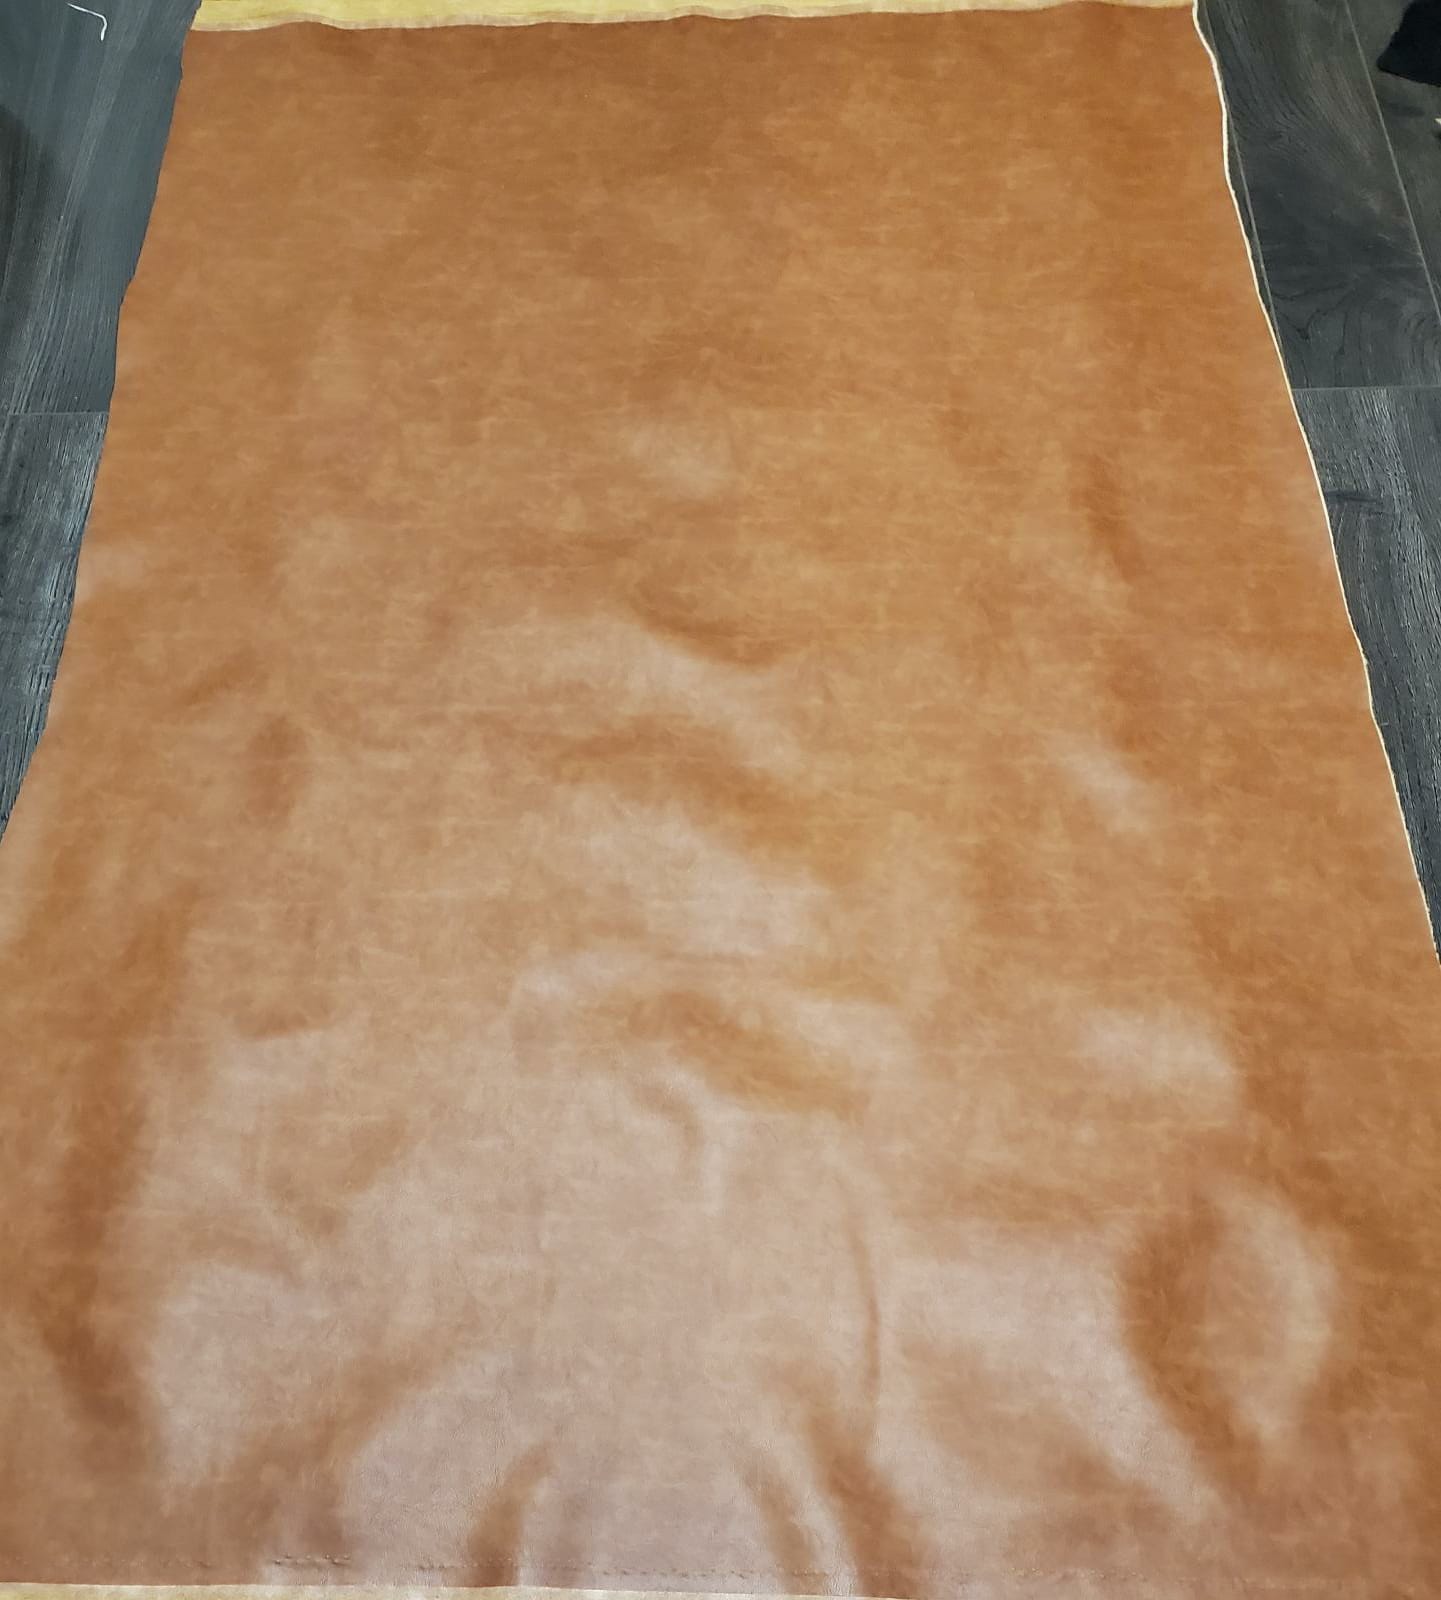  Faux vegan leather by the yard sheets distressed leather fabric for upholstery 30,000 Double Rubs vinyl sheets nappa leather crafts bookbinding books furniture fabrics uphilstery fuax material pu pleather faiux learher cruelty free nappa seat British tan brown